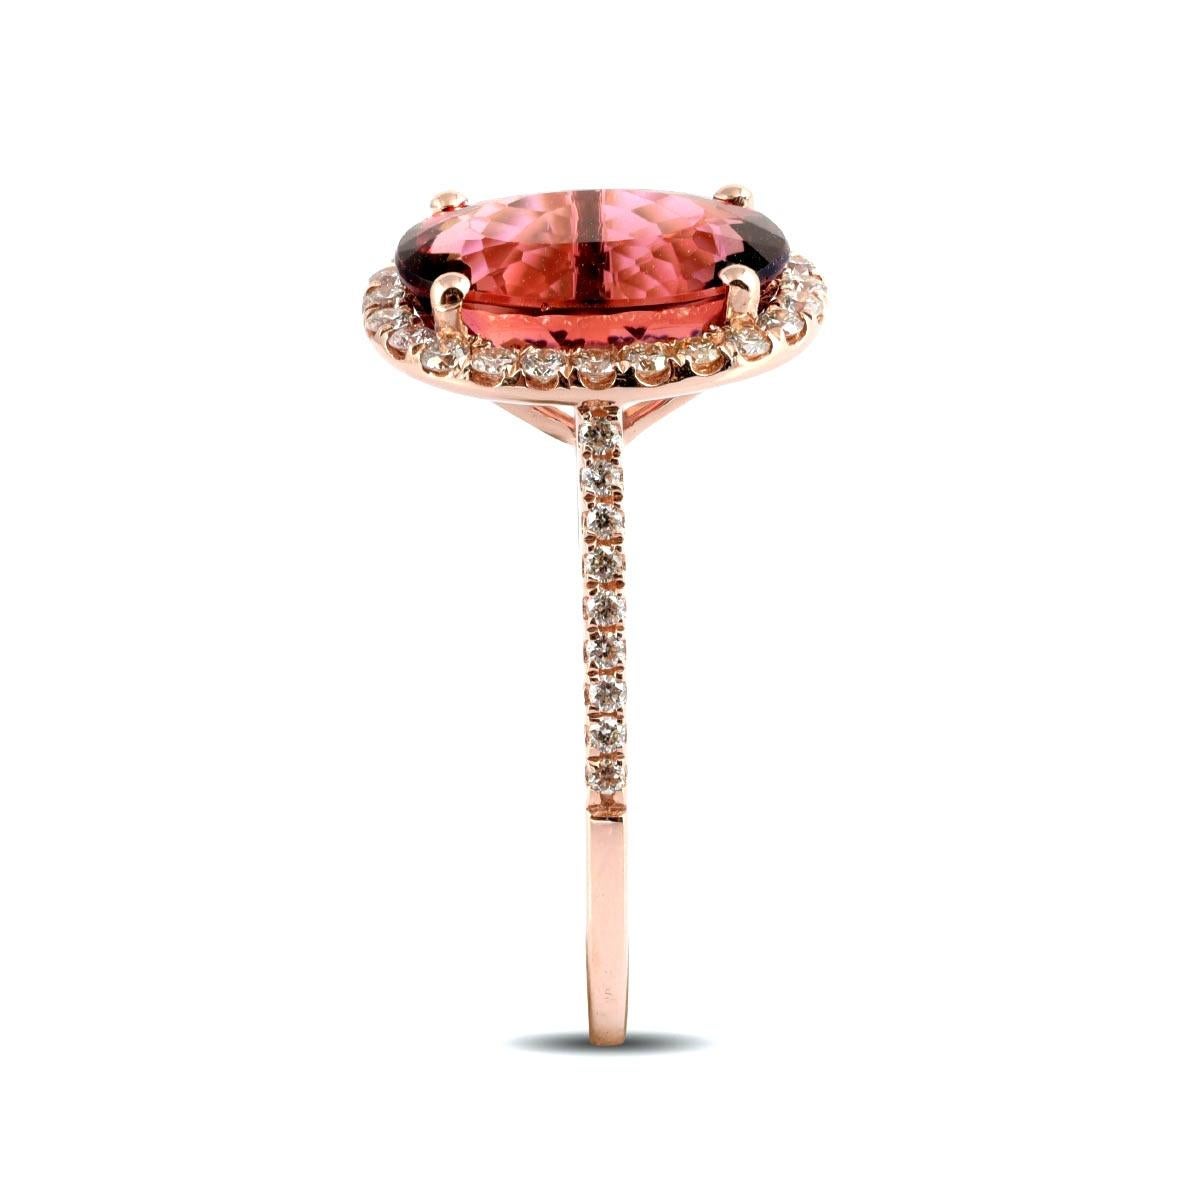 Mixed Cut 3.84 Carats Pink Tourmaline Diamonds set in 14K Rose Gold Ring For Sale